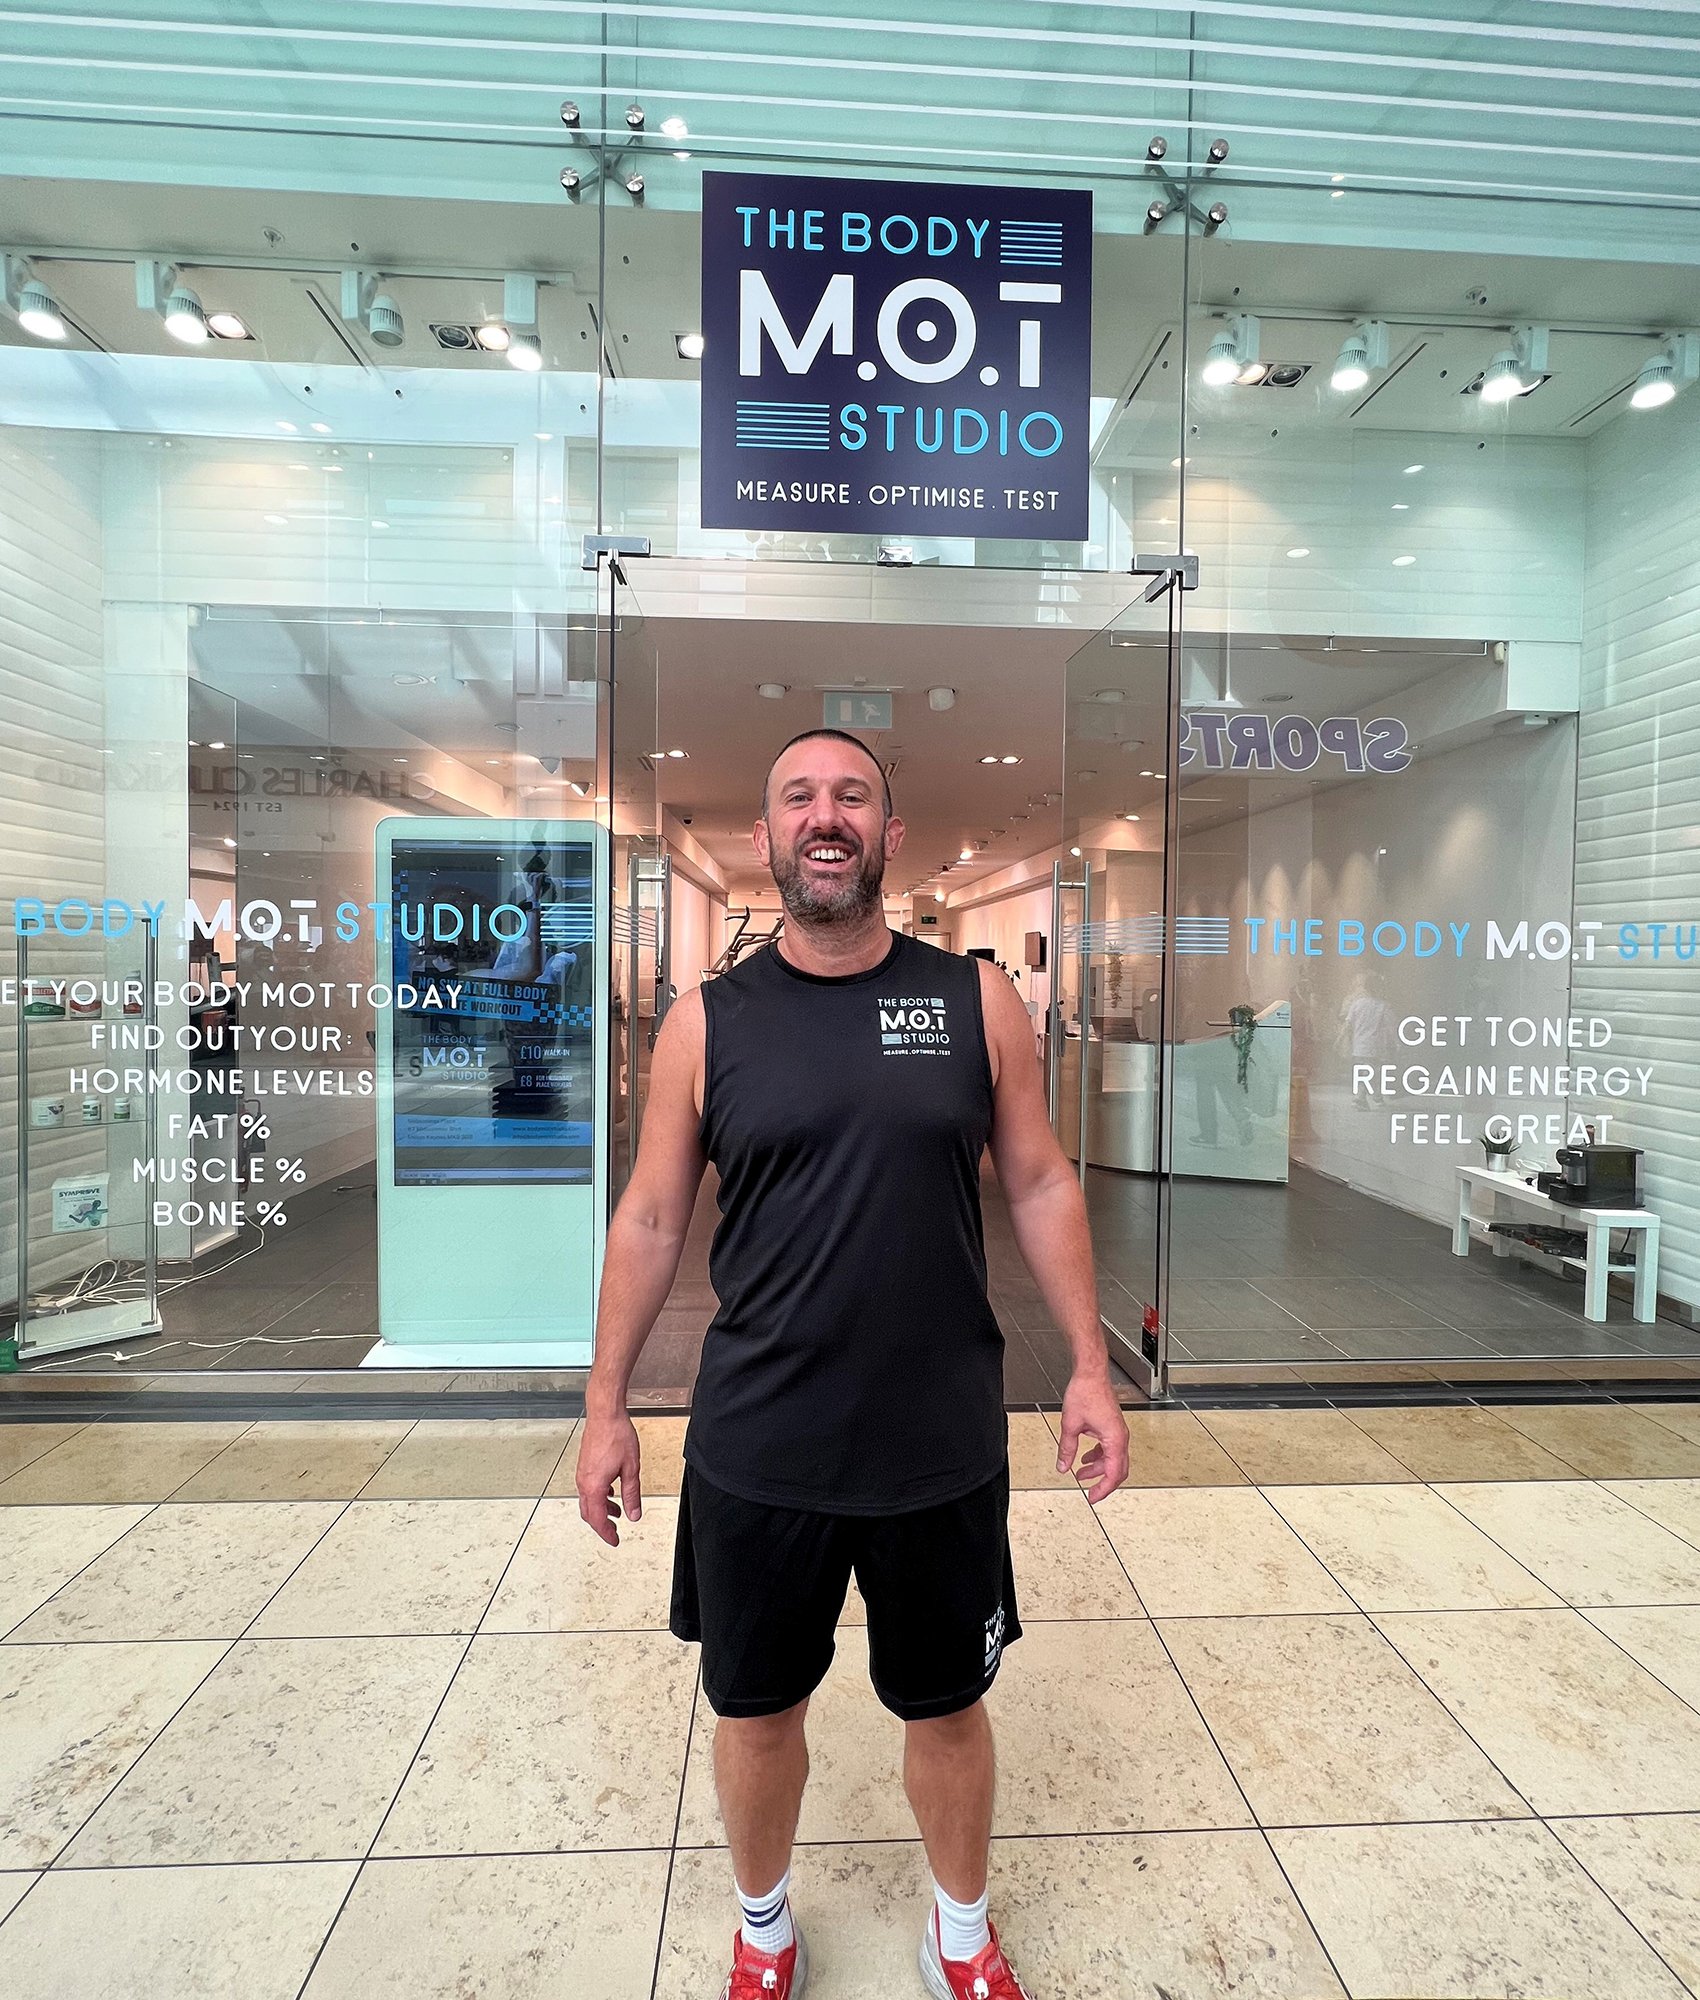 Pop-in body MOT could change your life at Midsummer Place